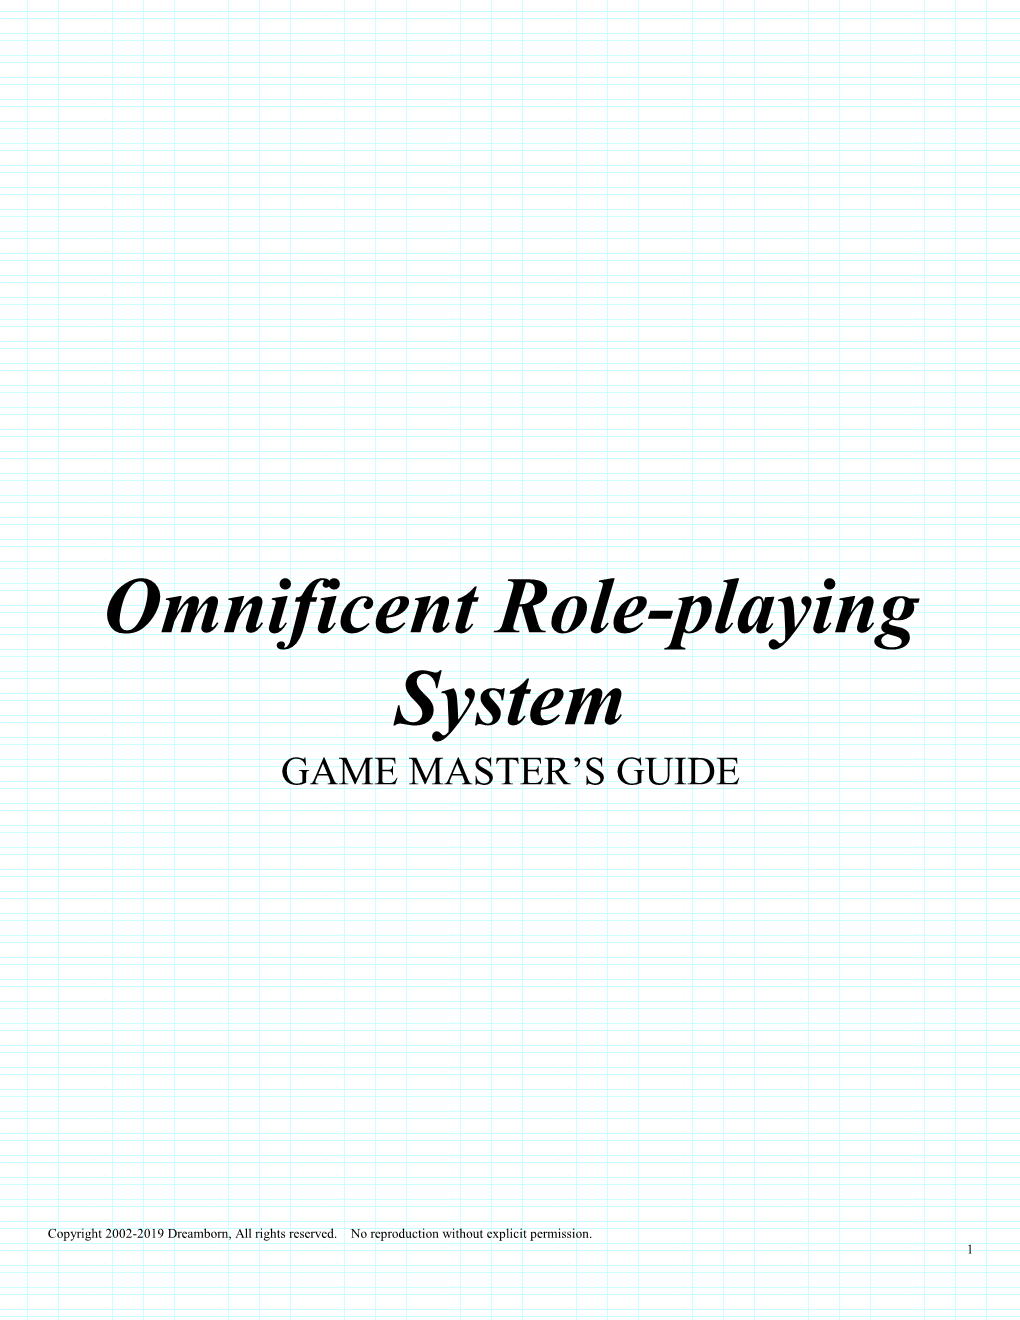 ORS GM's Guide